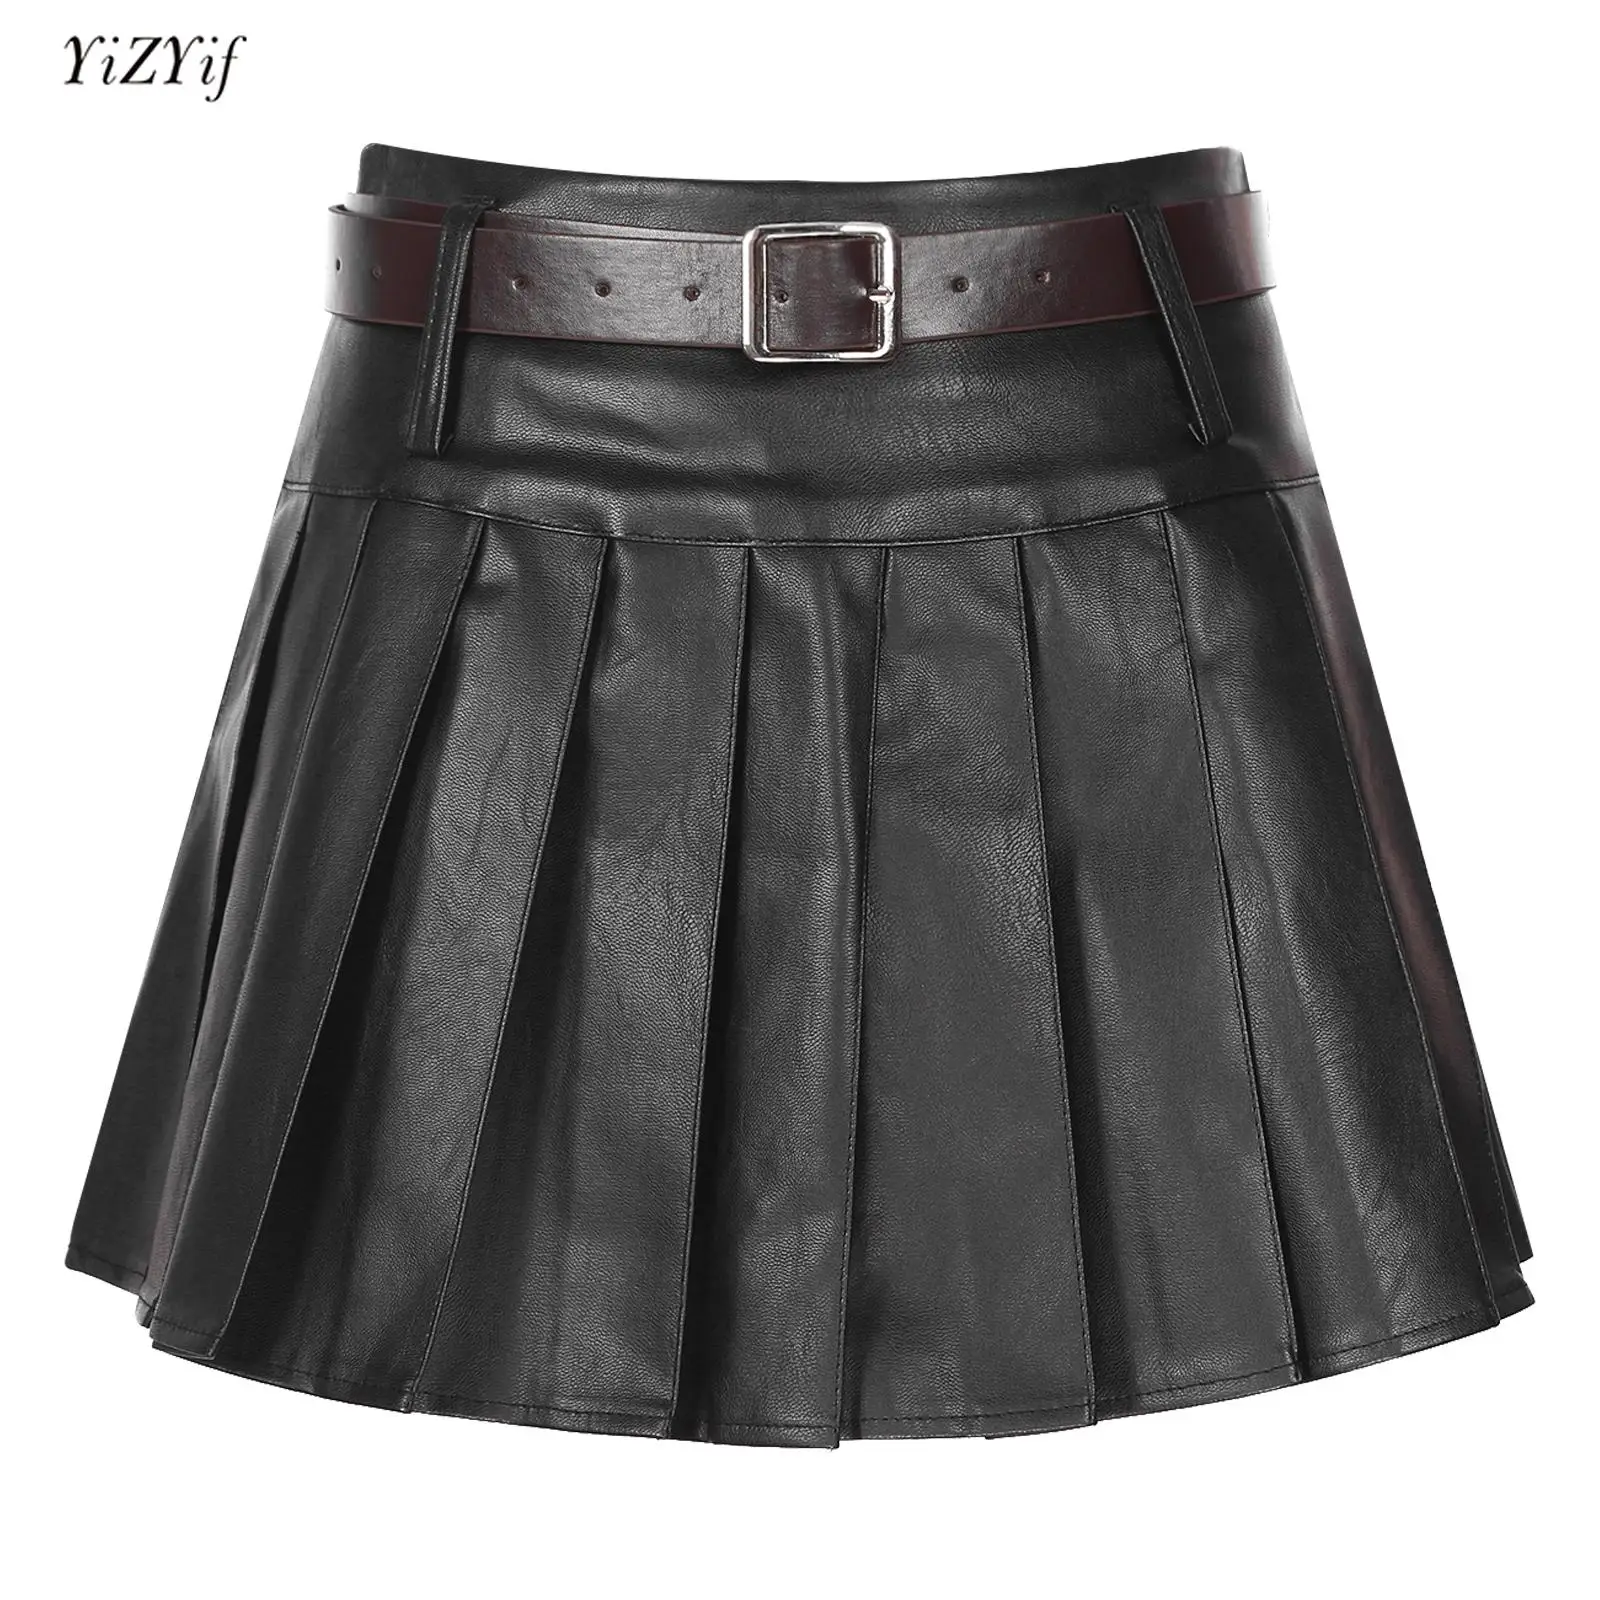 Womens Faux Leather Pleated Skirt Fashion Clubwear High Waist Built-in Shorts Skirts with Adjustable Belt Party Street Dancewear mulo 2mp ip camera wifi survalance camera wireless smart outdoor camera tuya street camera with motion sensor cctv yours camera